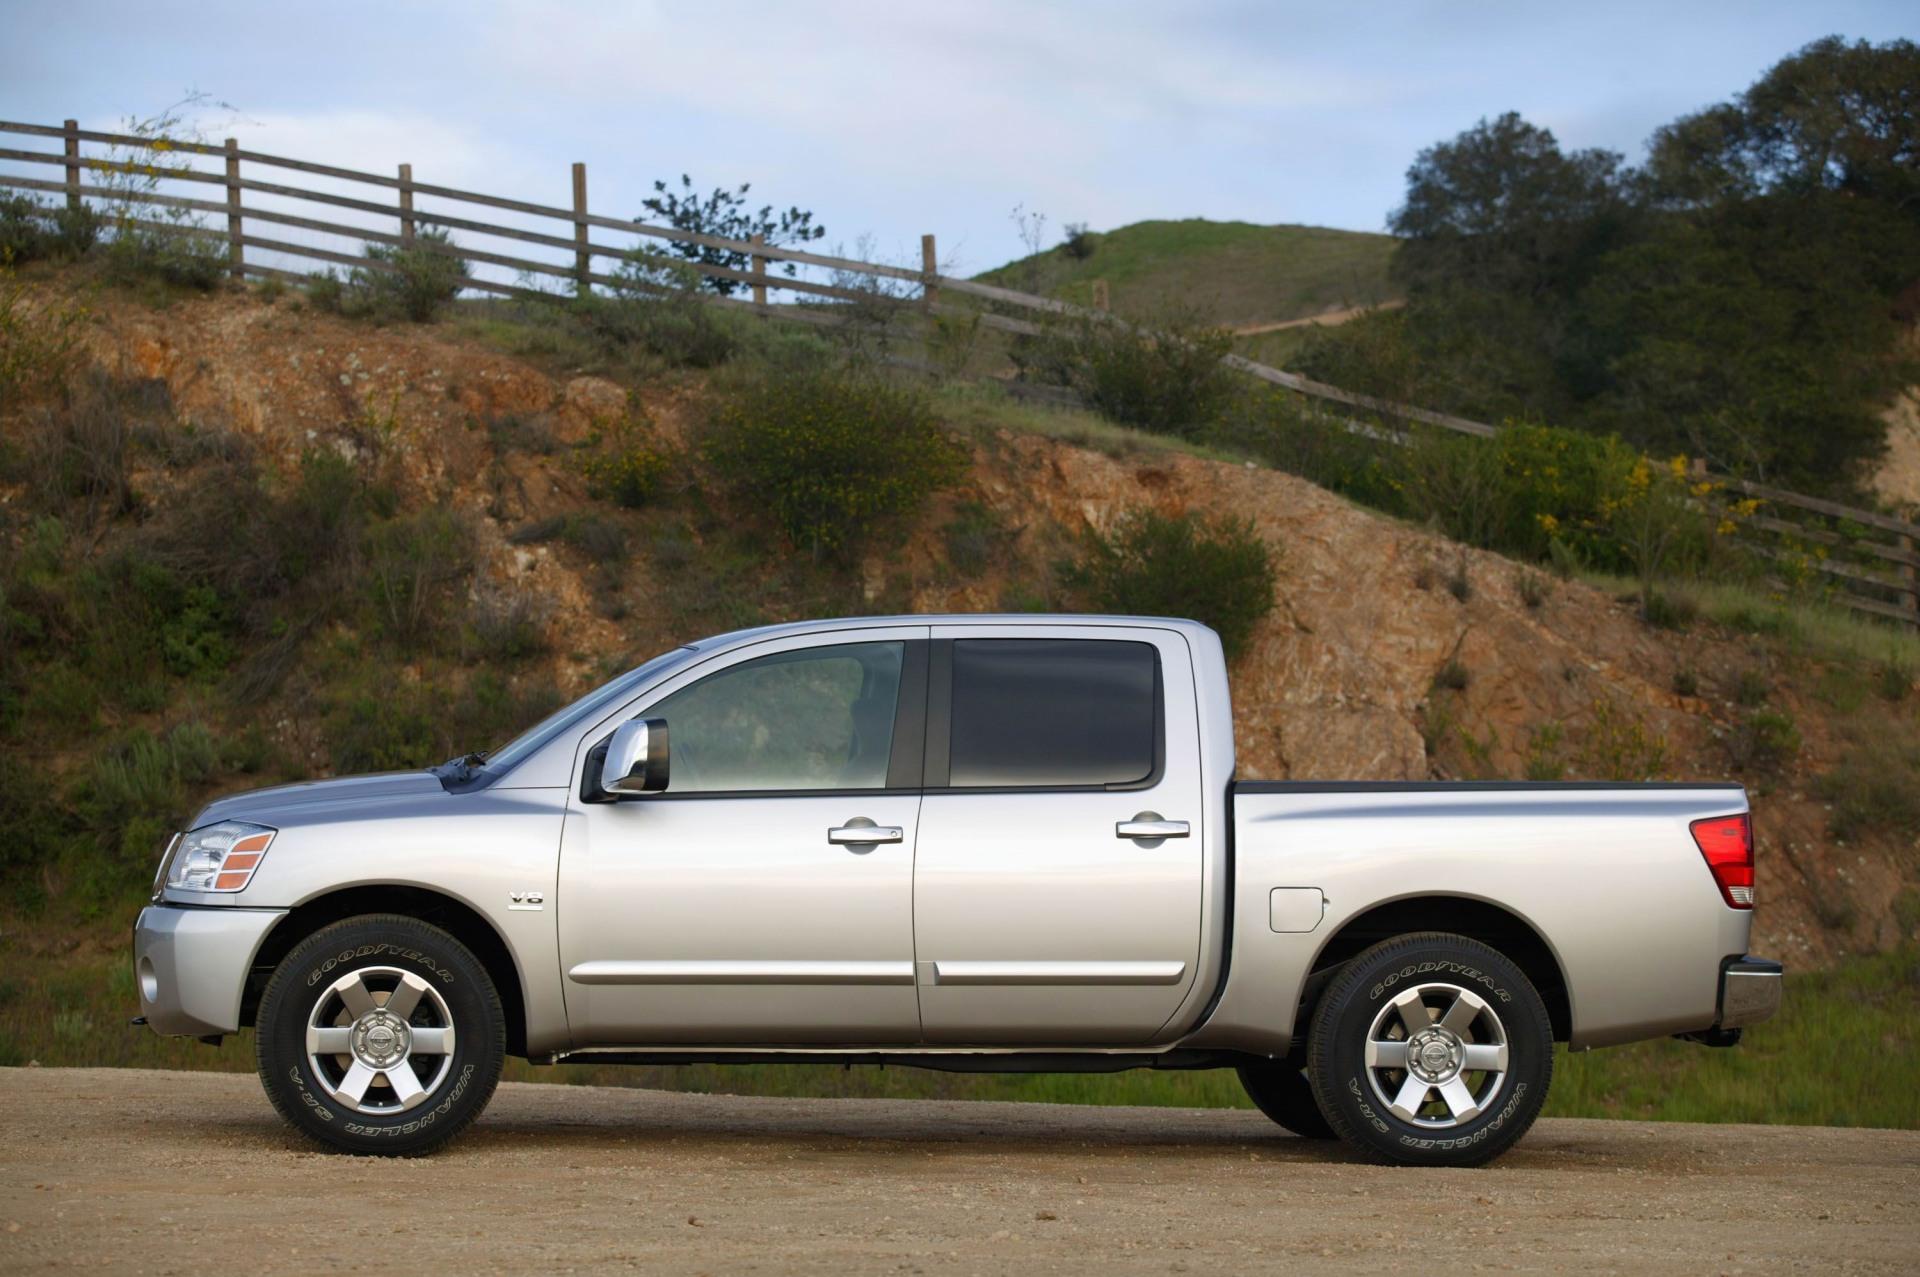 2007 Nissan Titan Pictures, History, Value, Research, News